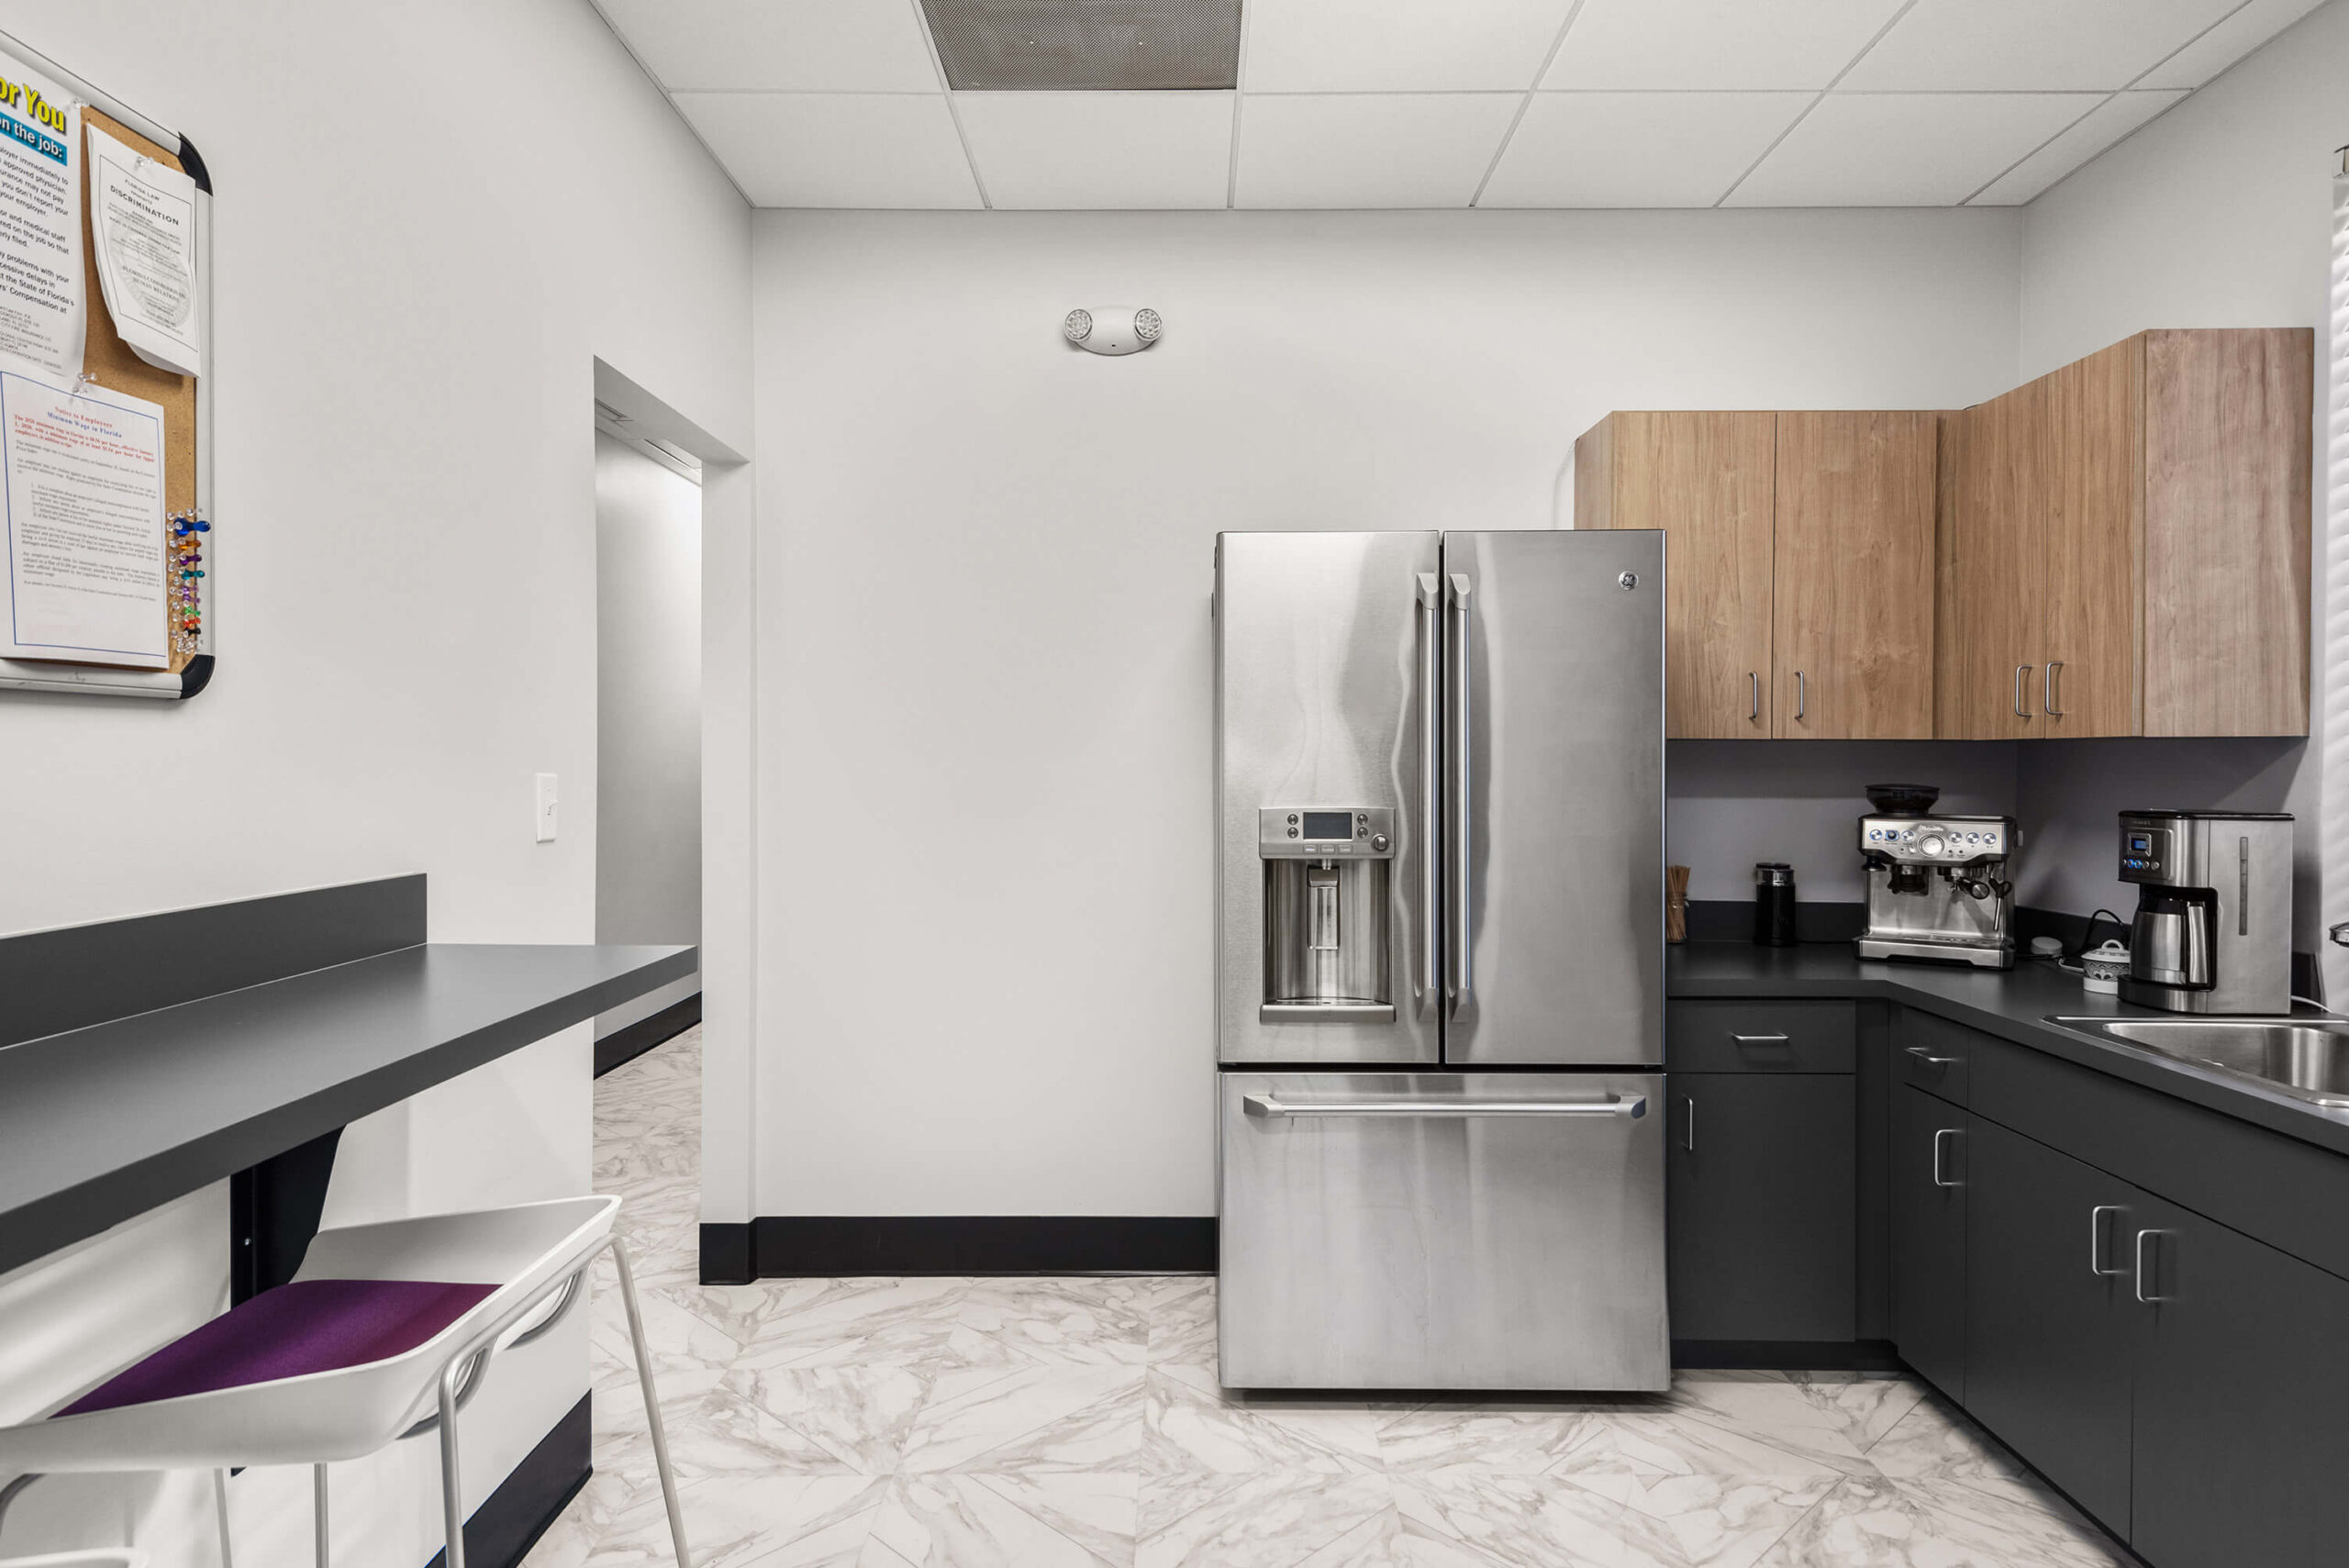 Forward Law Office kitchen area